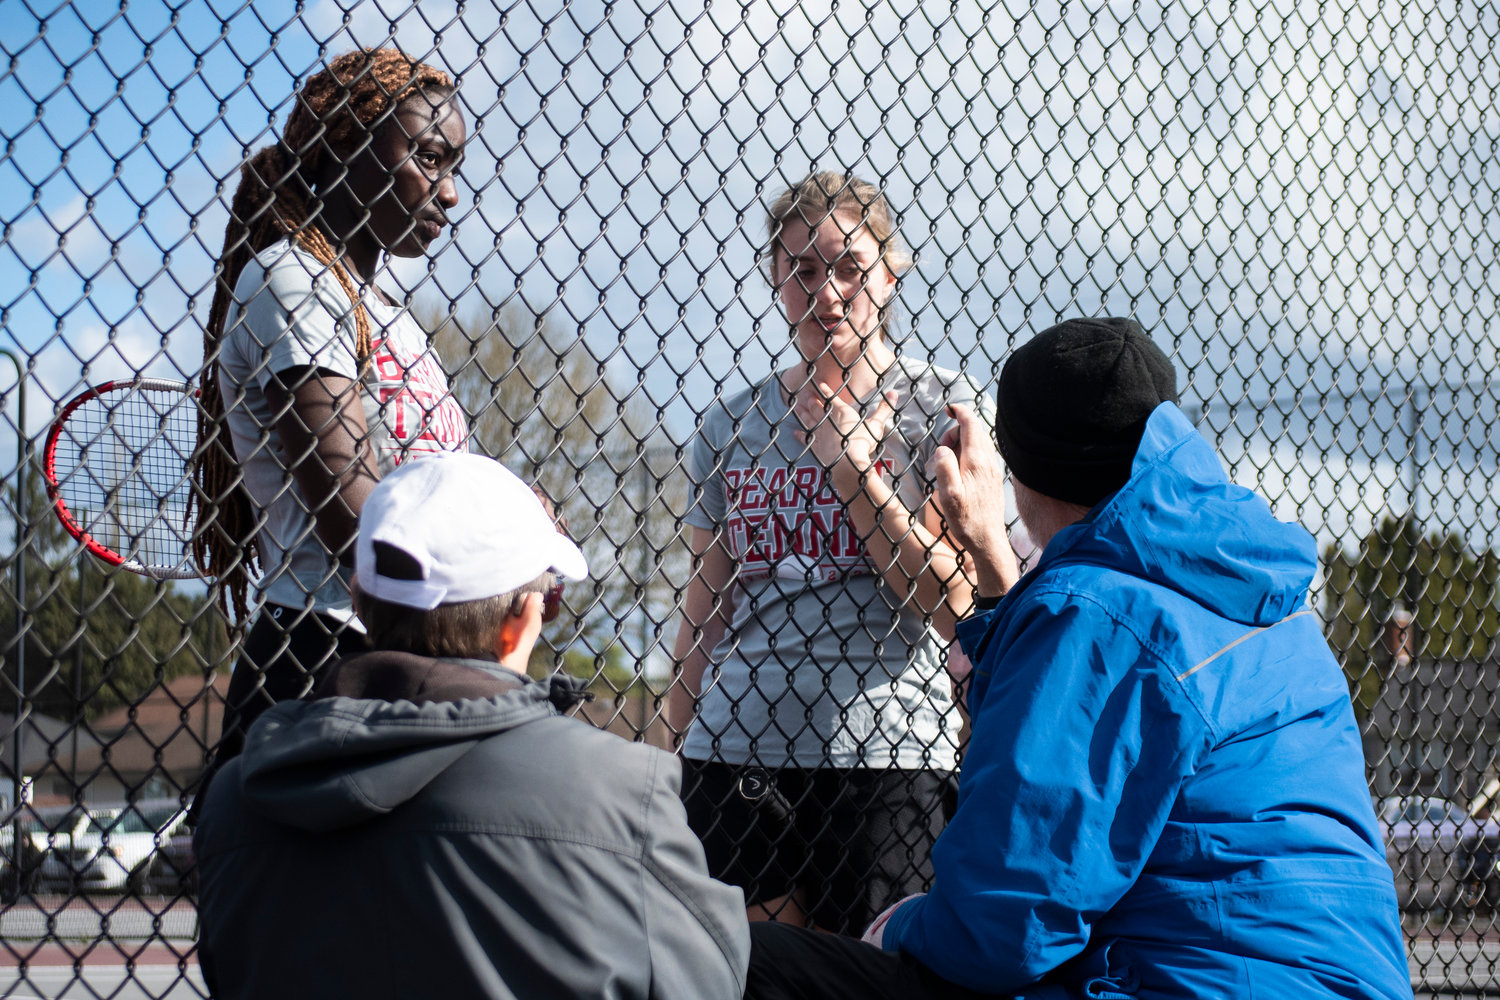 W.F. West’s first doubles team Mariama Ceesay (left) and Kaylynne Dowling are coached in between sets by coach Jack State and assistant coach Denise Boulac on Wednesday in Chehalis.